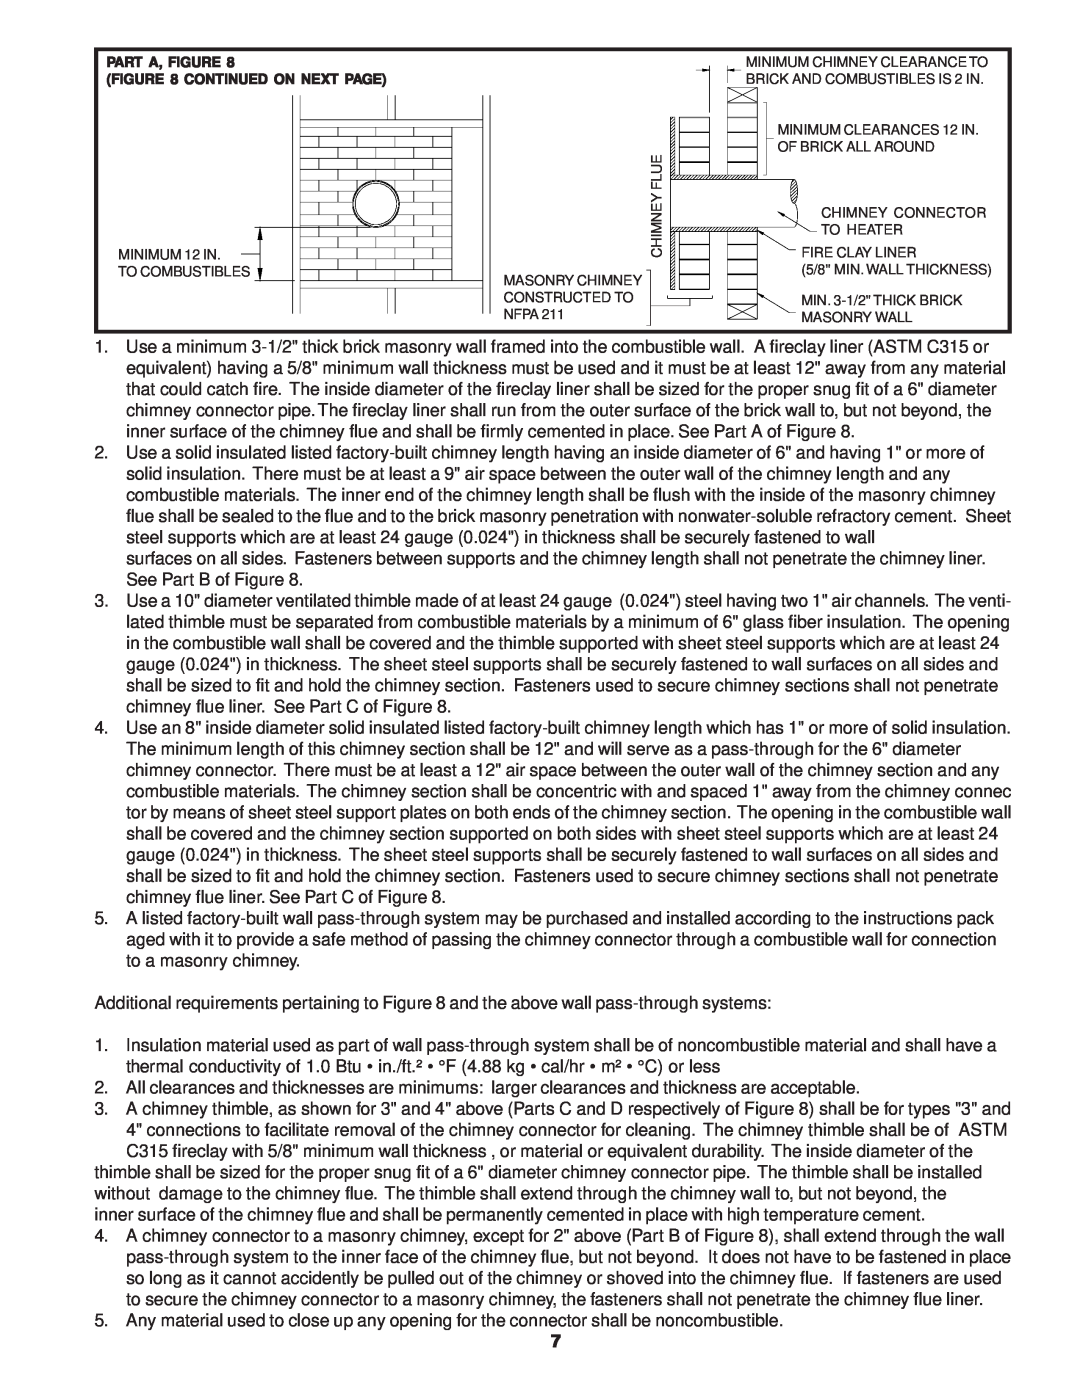 United States Stove C226 owner manual Part A, Figure Continued On Next Page, MINIMUM 12 IN TO COMBUSTIBLES, Masonry Wall 